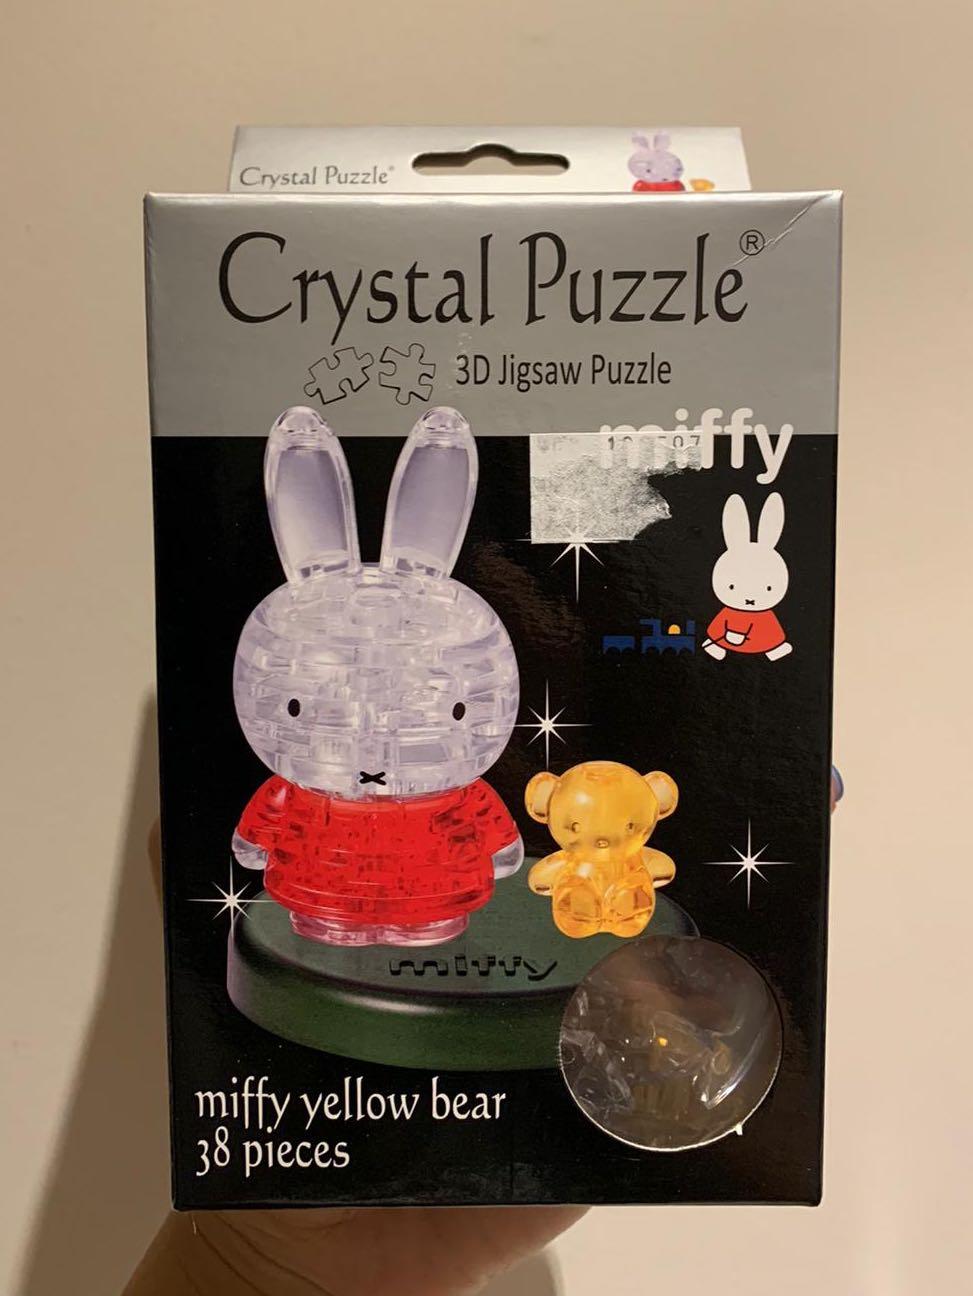 Miffy Yellow Bear DIY 3D Crystal Puzzle Jigsaw 38 pieces Toy Model Decoration 